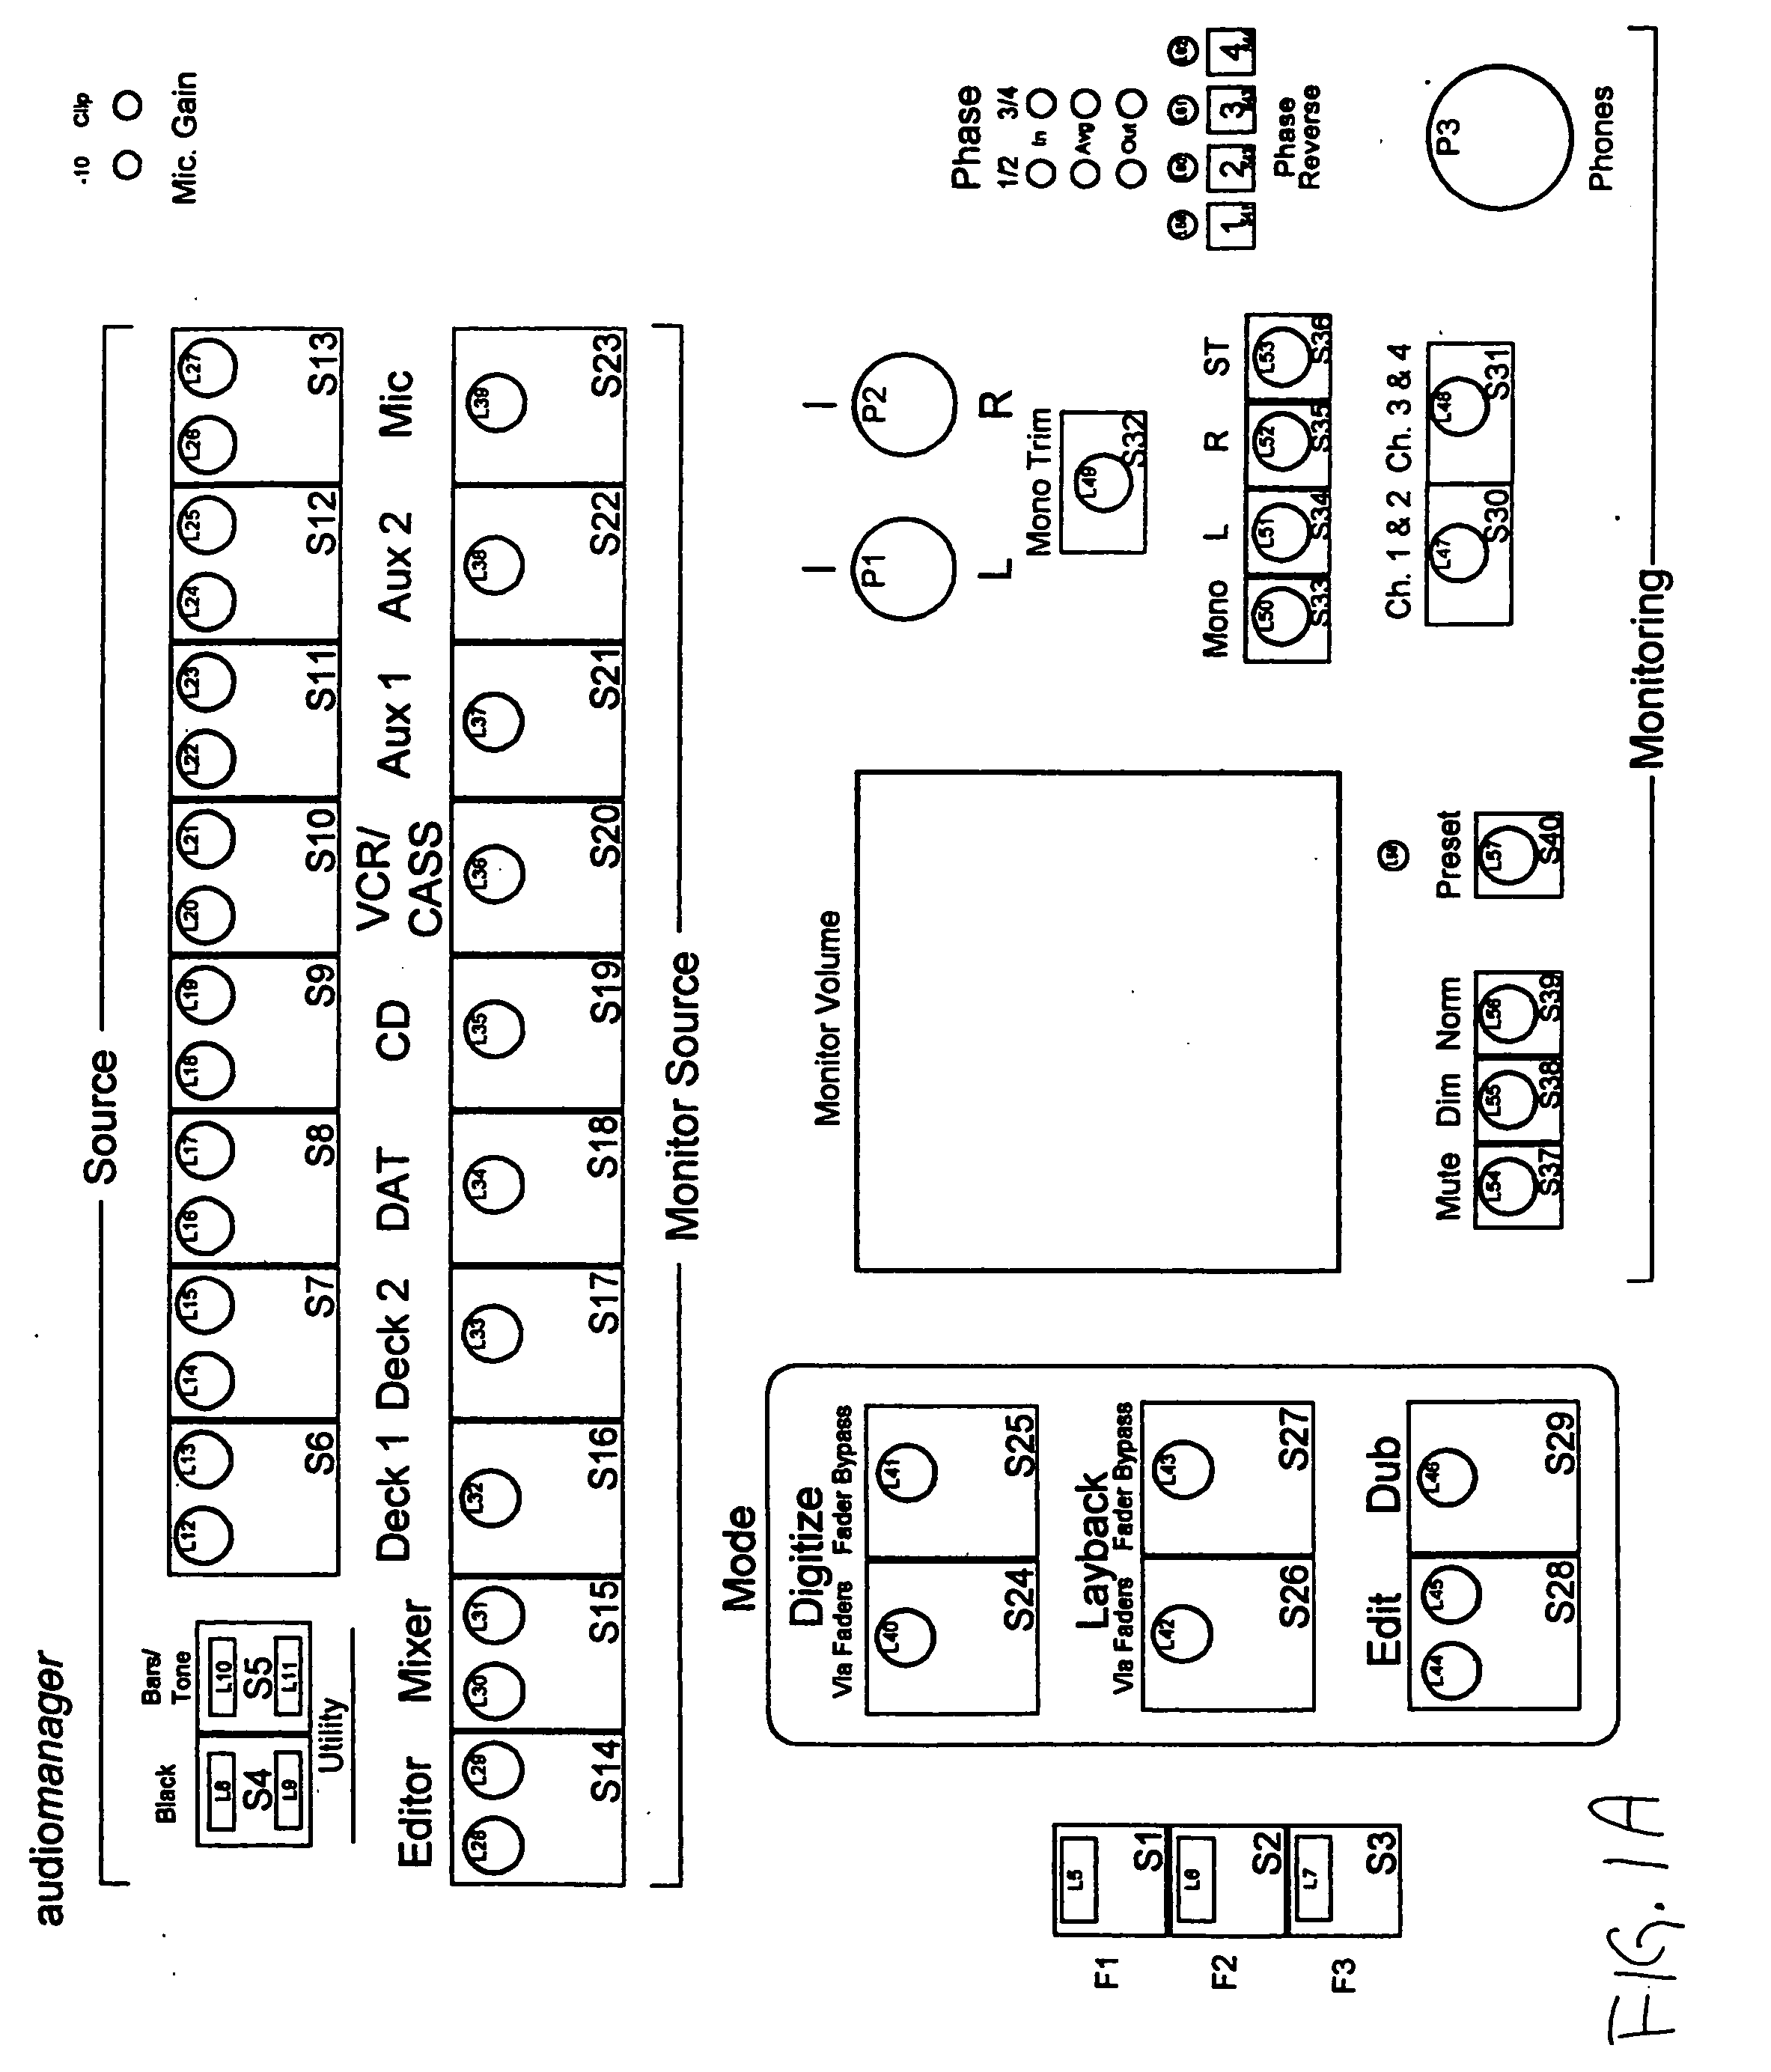 Control platform for multiple signal routing and interfacing in an audio and visual environment